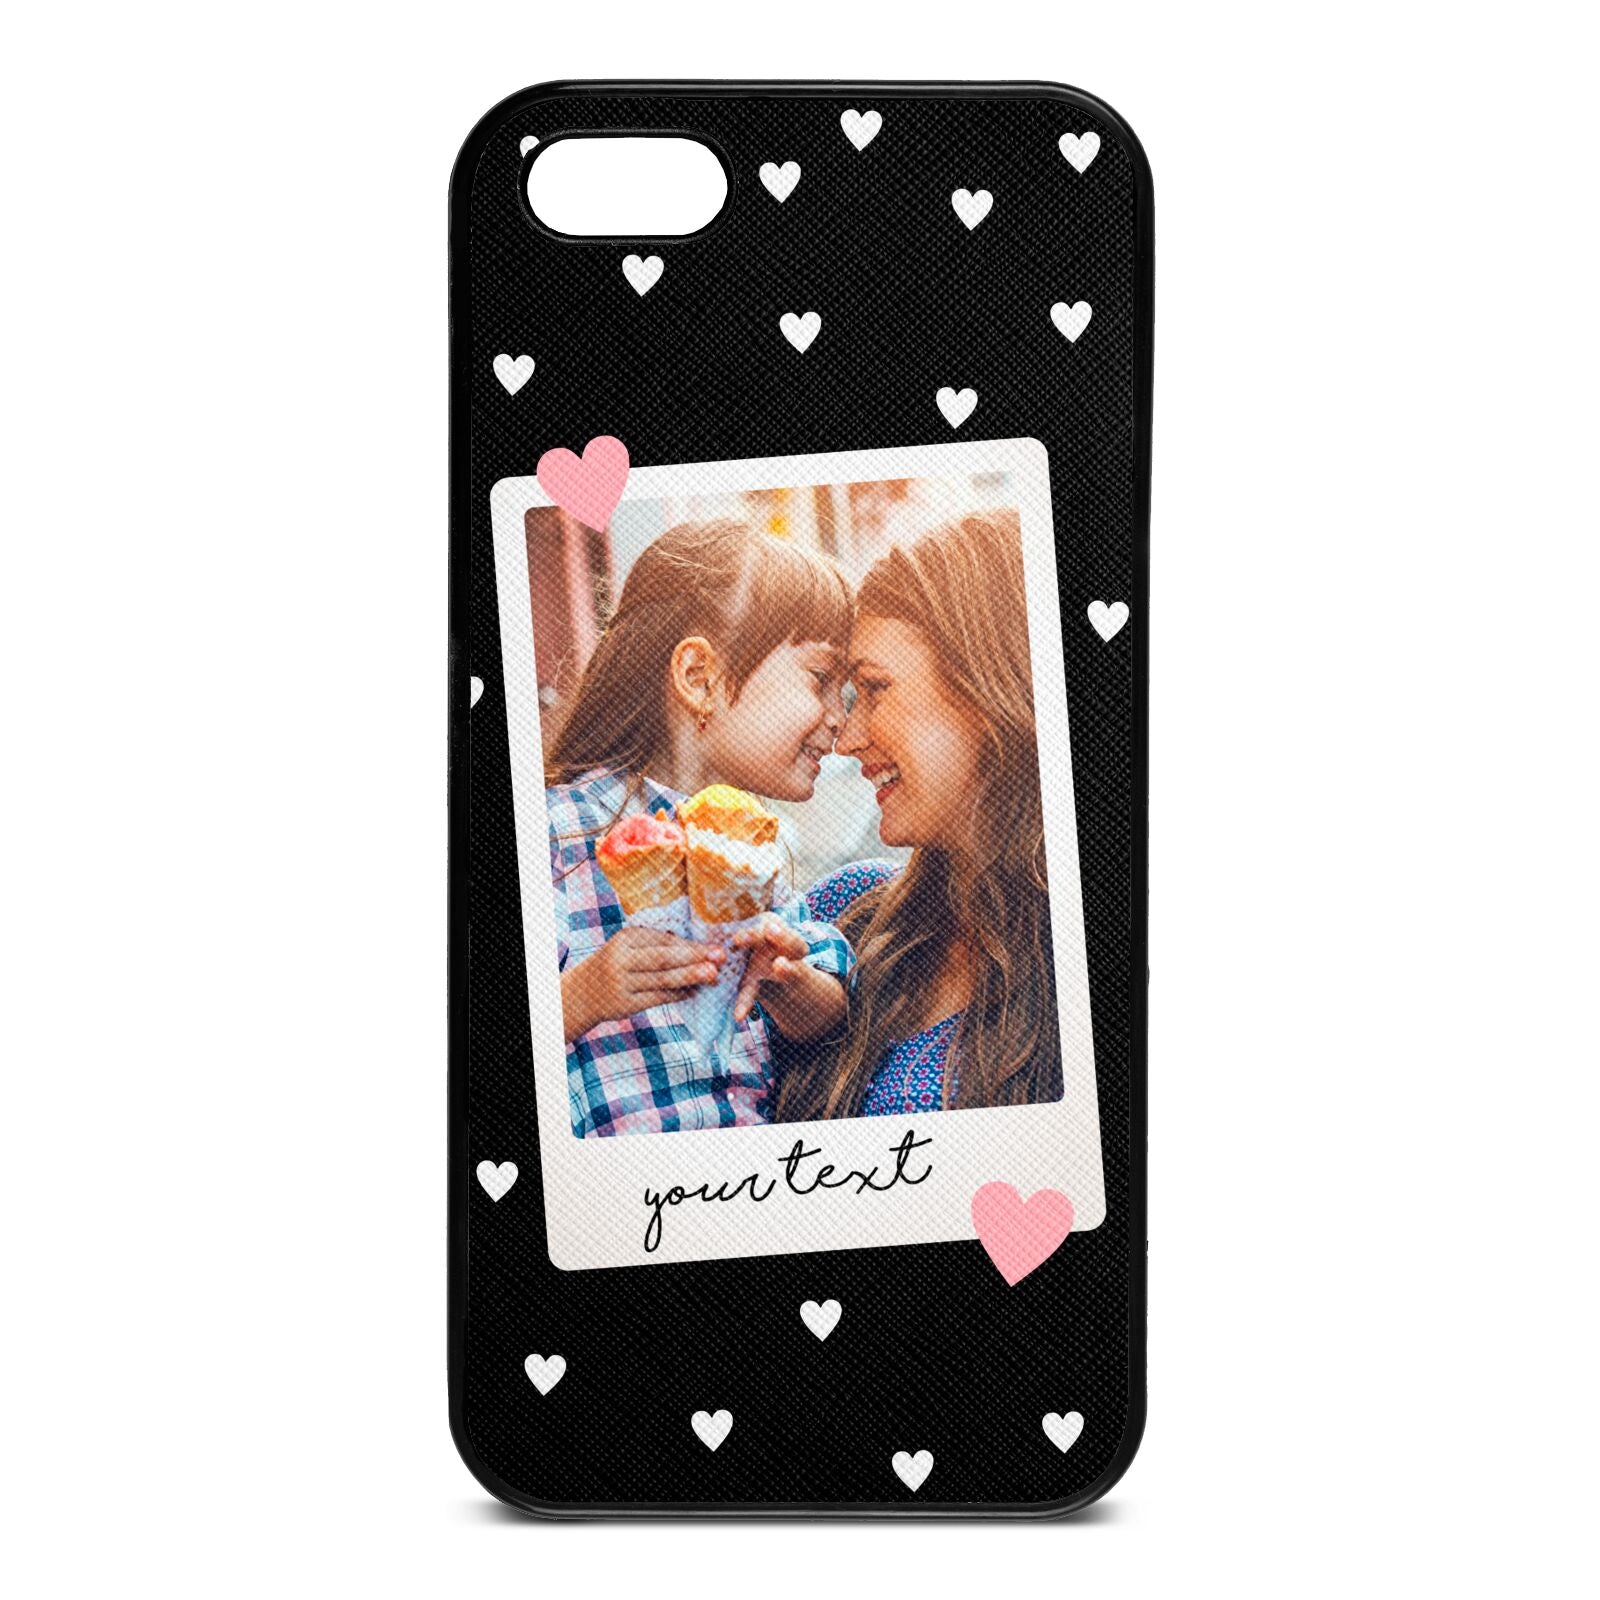 Personalised Photo Love Hearts Black Saffiano Leather iPhone 5 Case